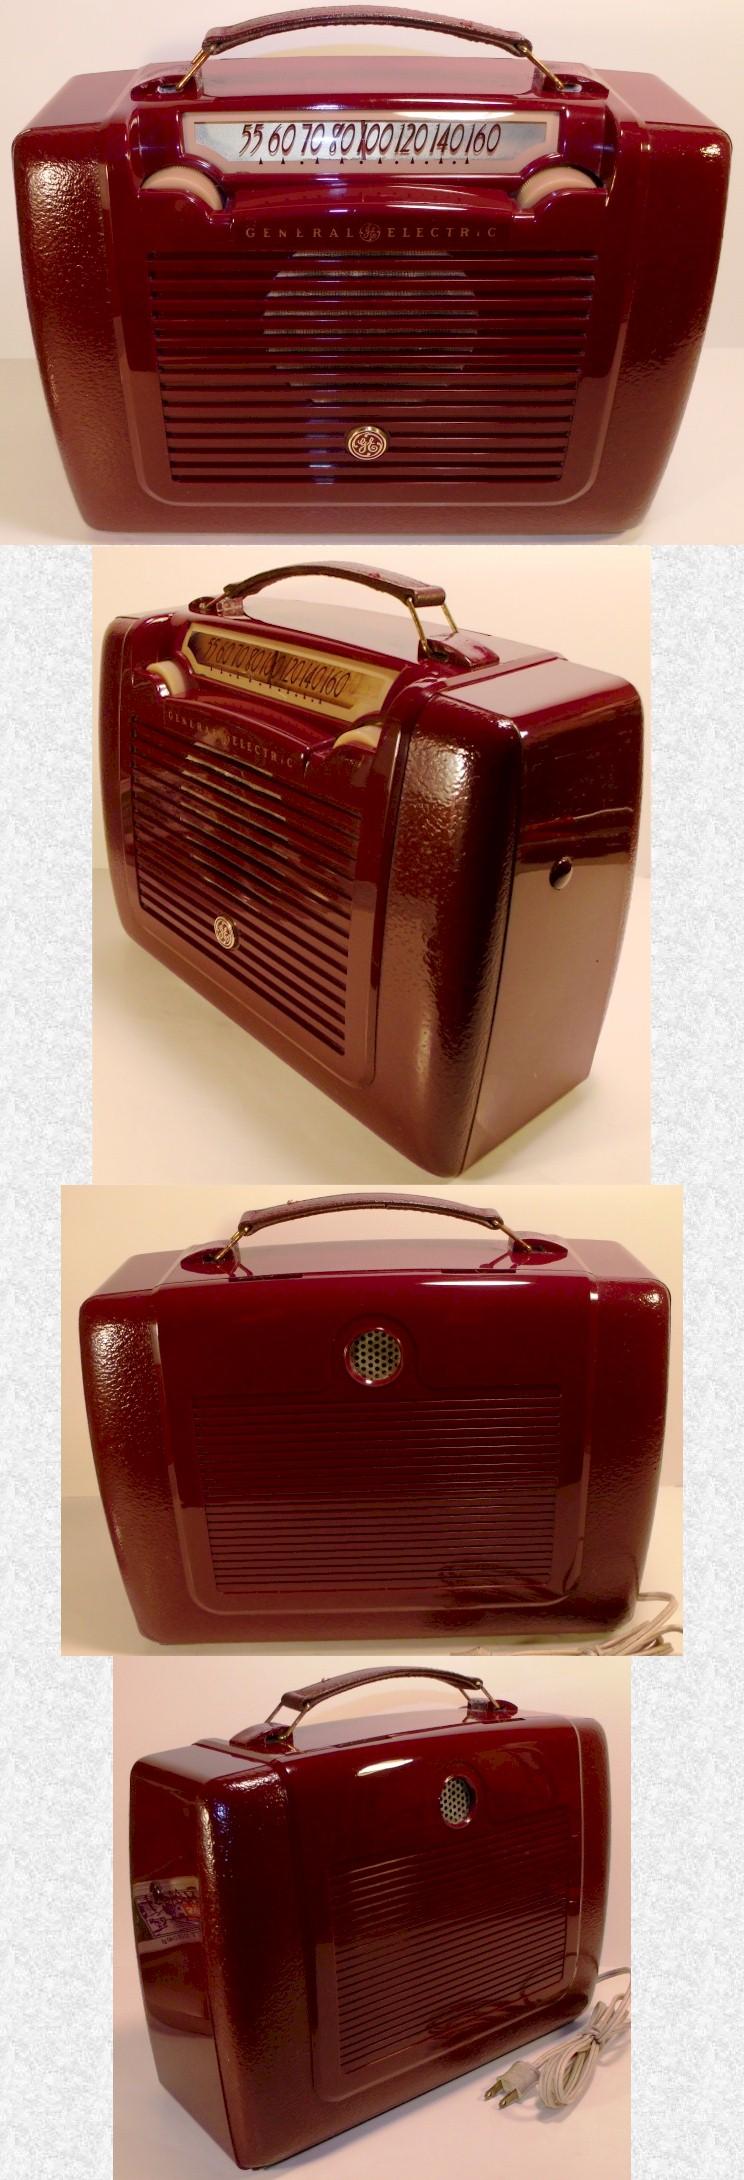 General Electric 150 Portable (1949)